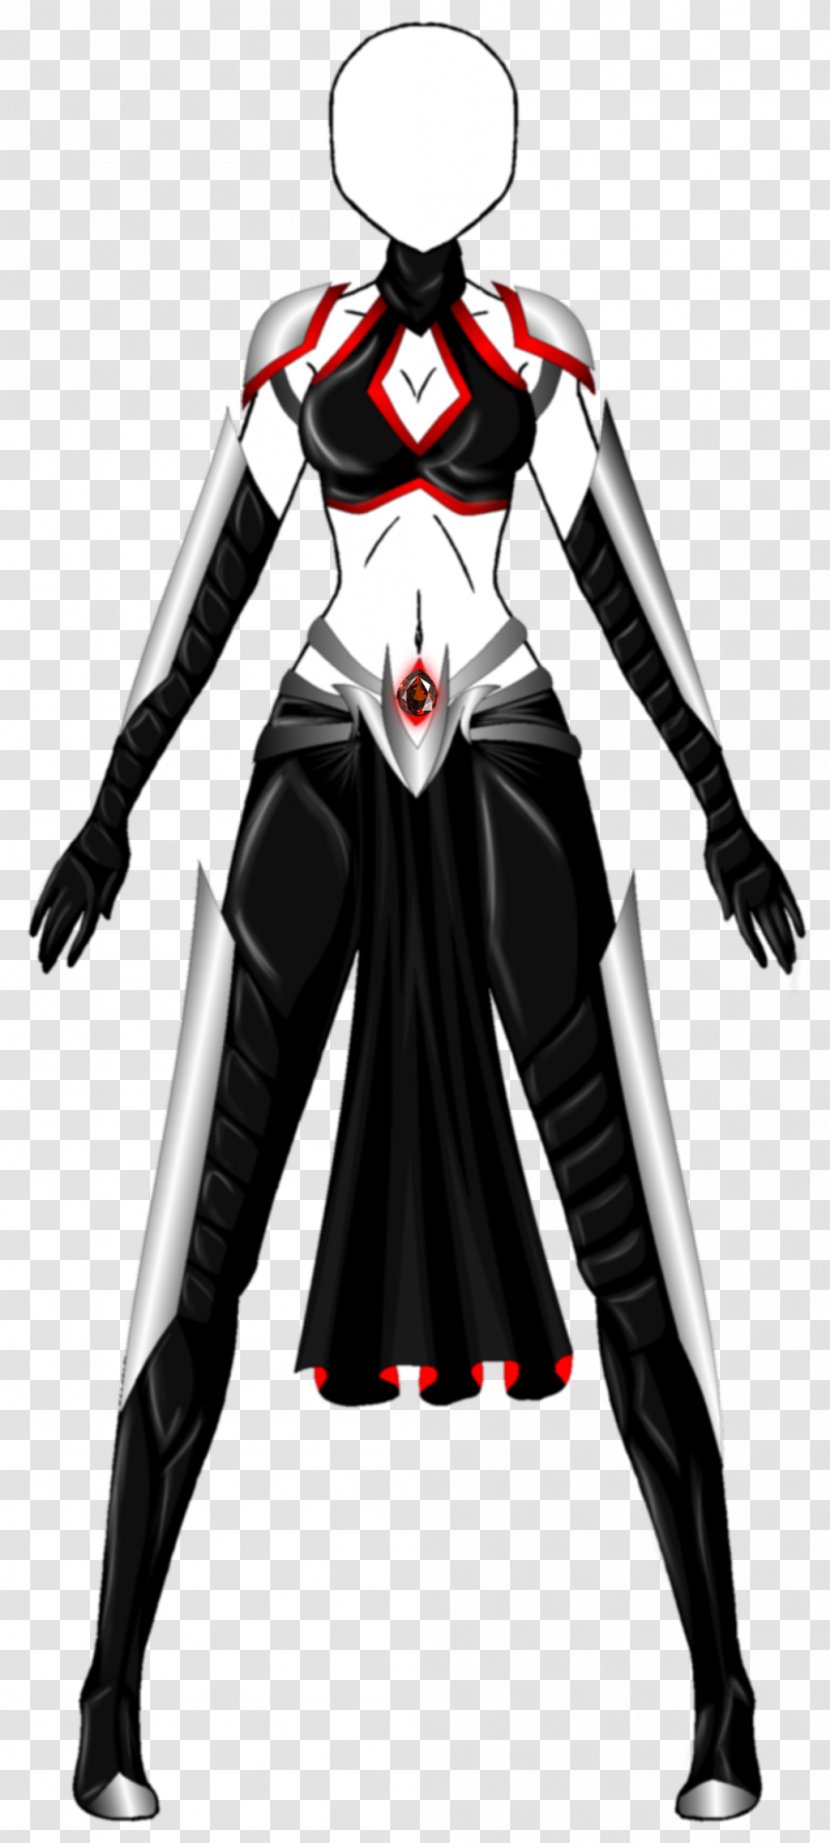 Drawing Art Female Clothing - Heart - Outfit Transparent PNG